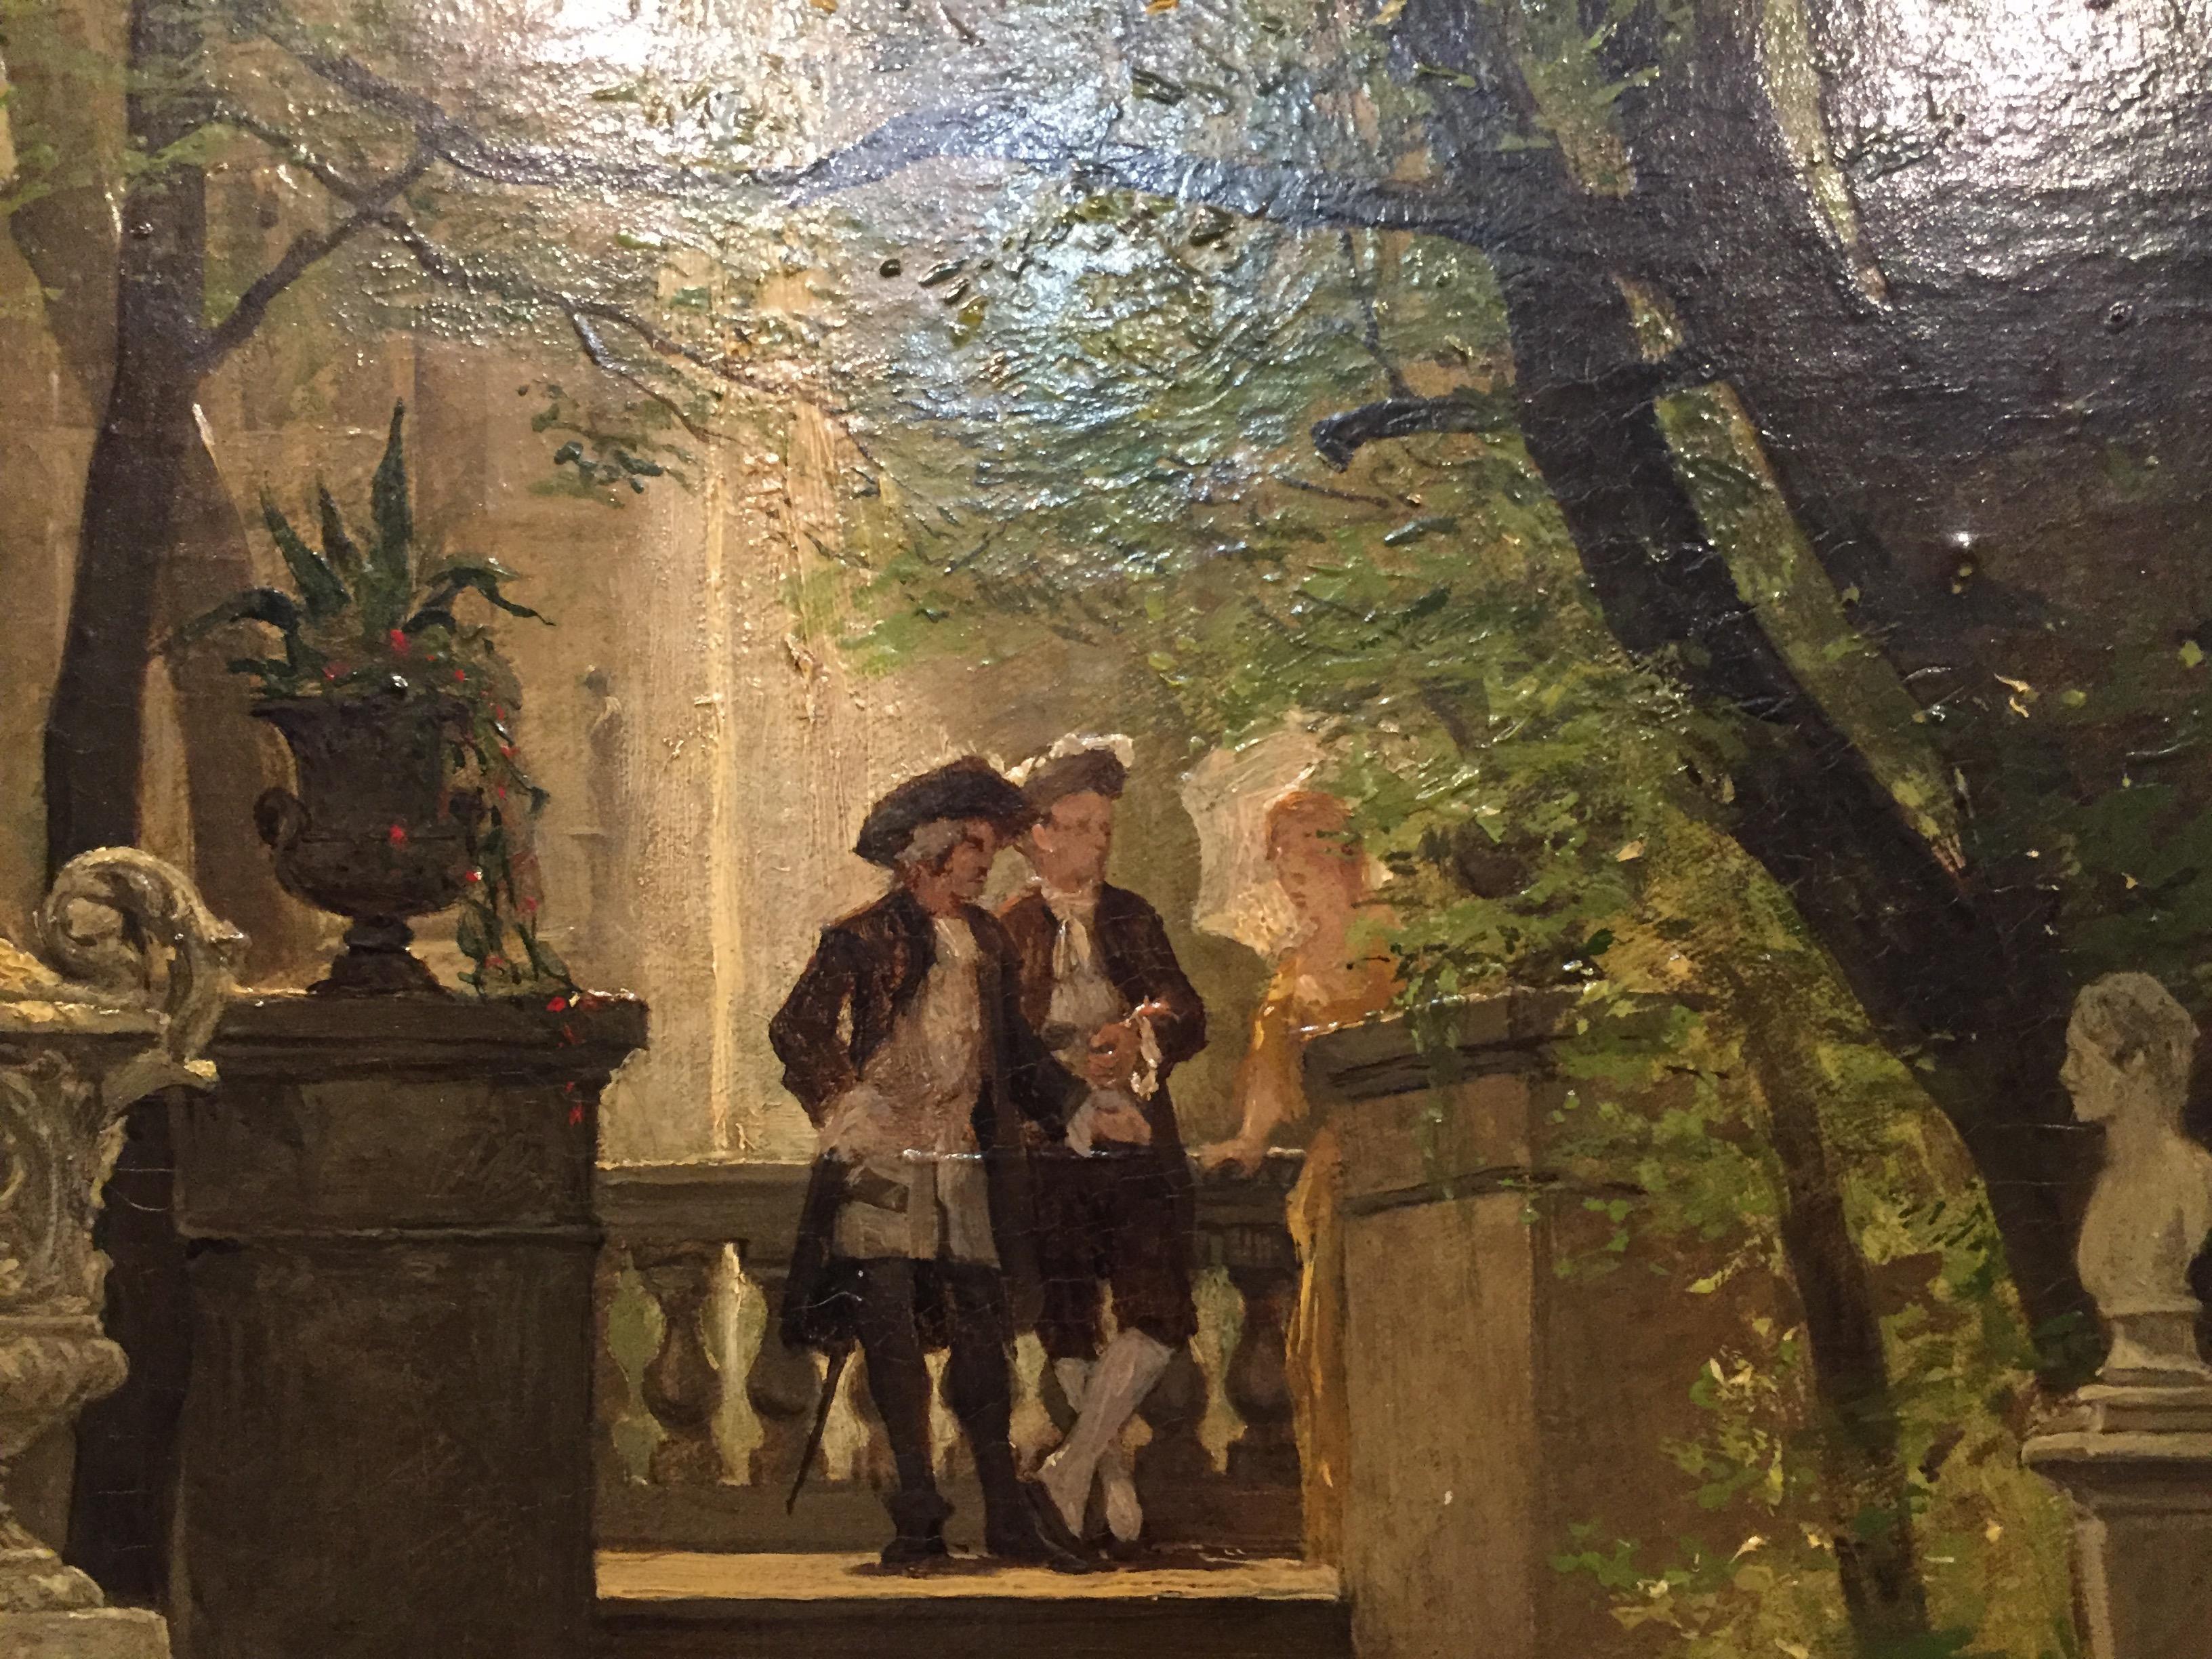 Oil Painting by P. F. Flickel in the Castle Garden 7